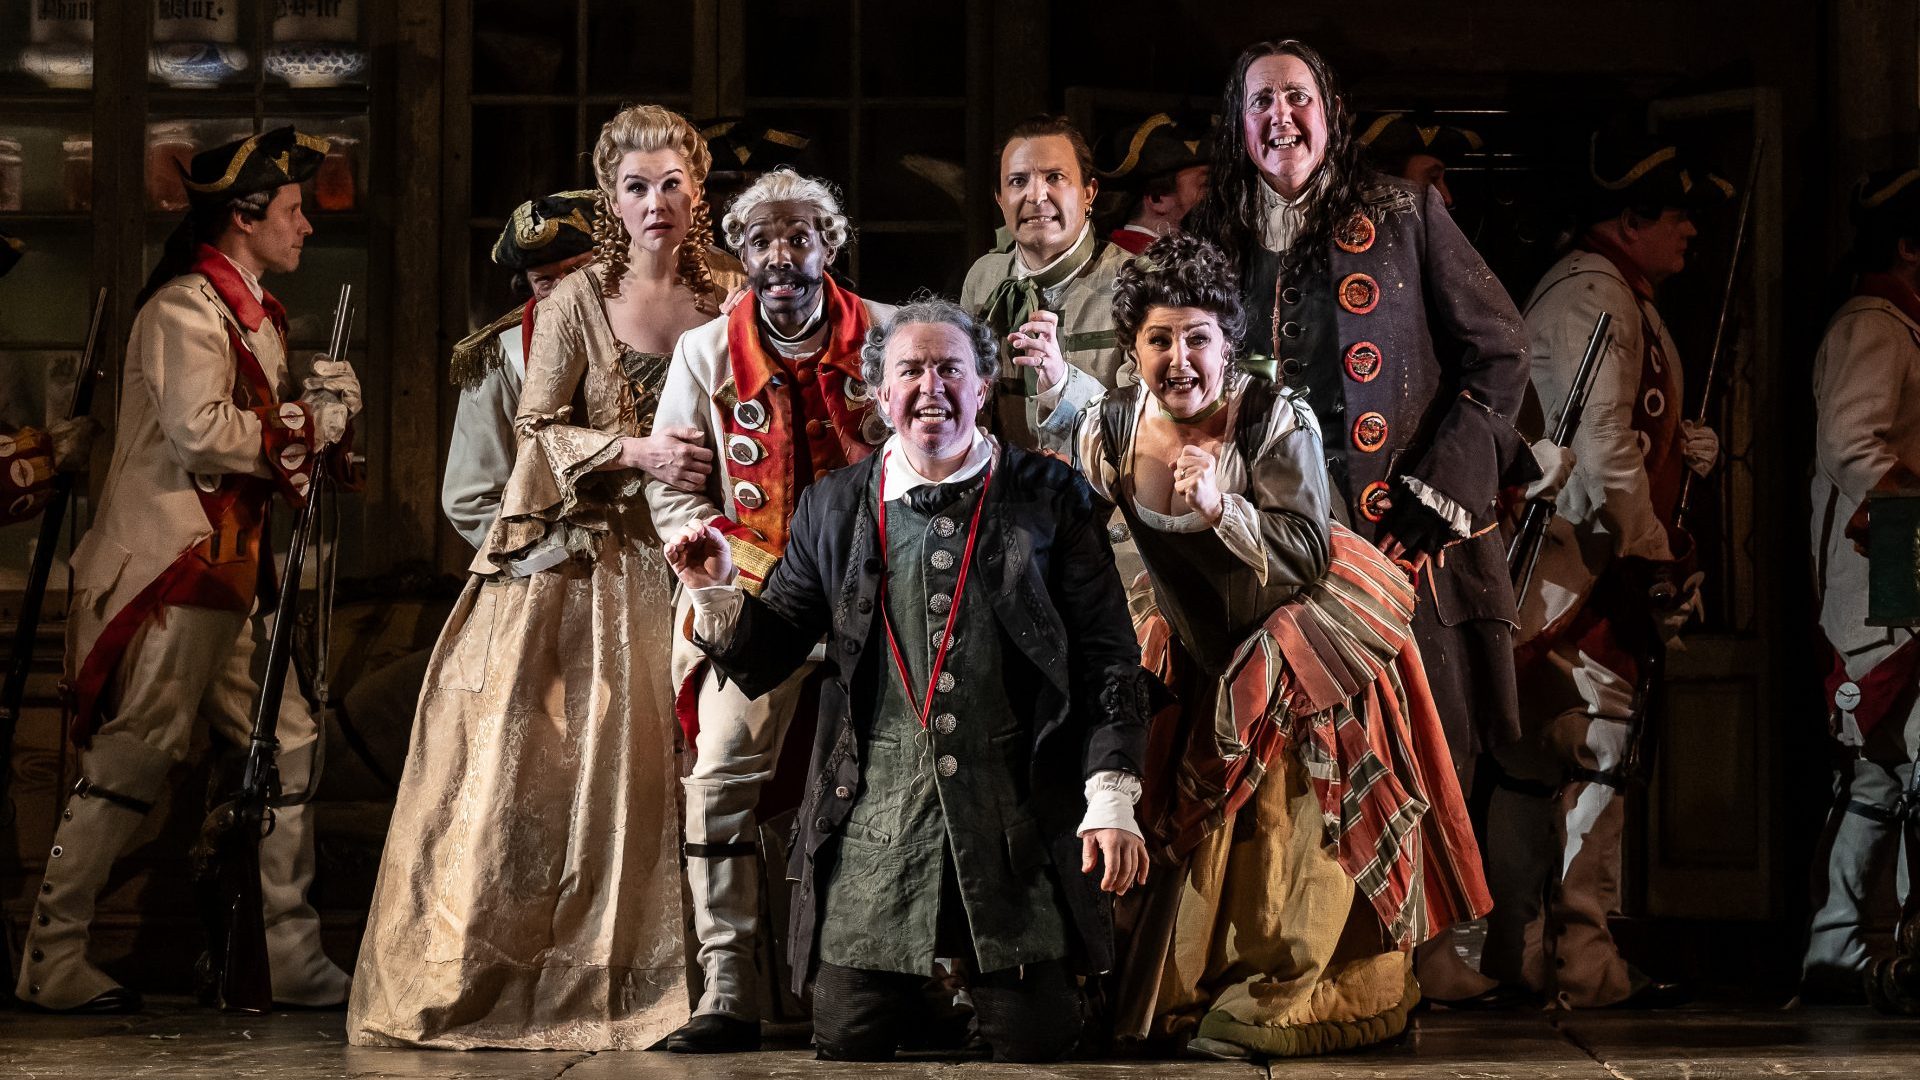 The Barber of Seville by Rossini; English National Opera. Photo: © CLIVE BARDA/ArenaPAL